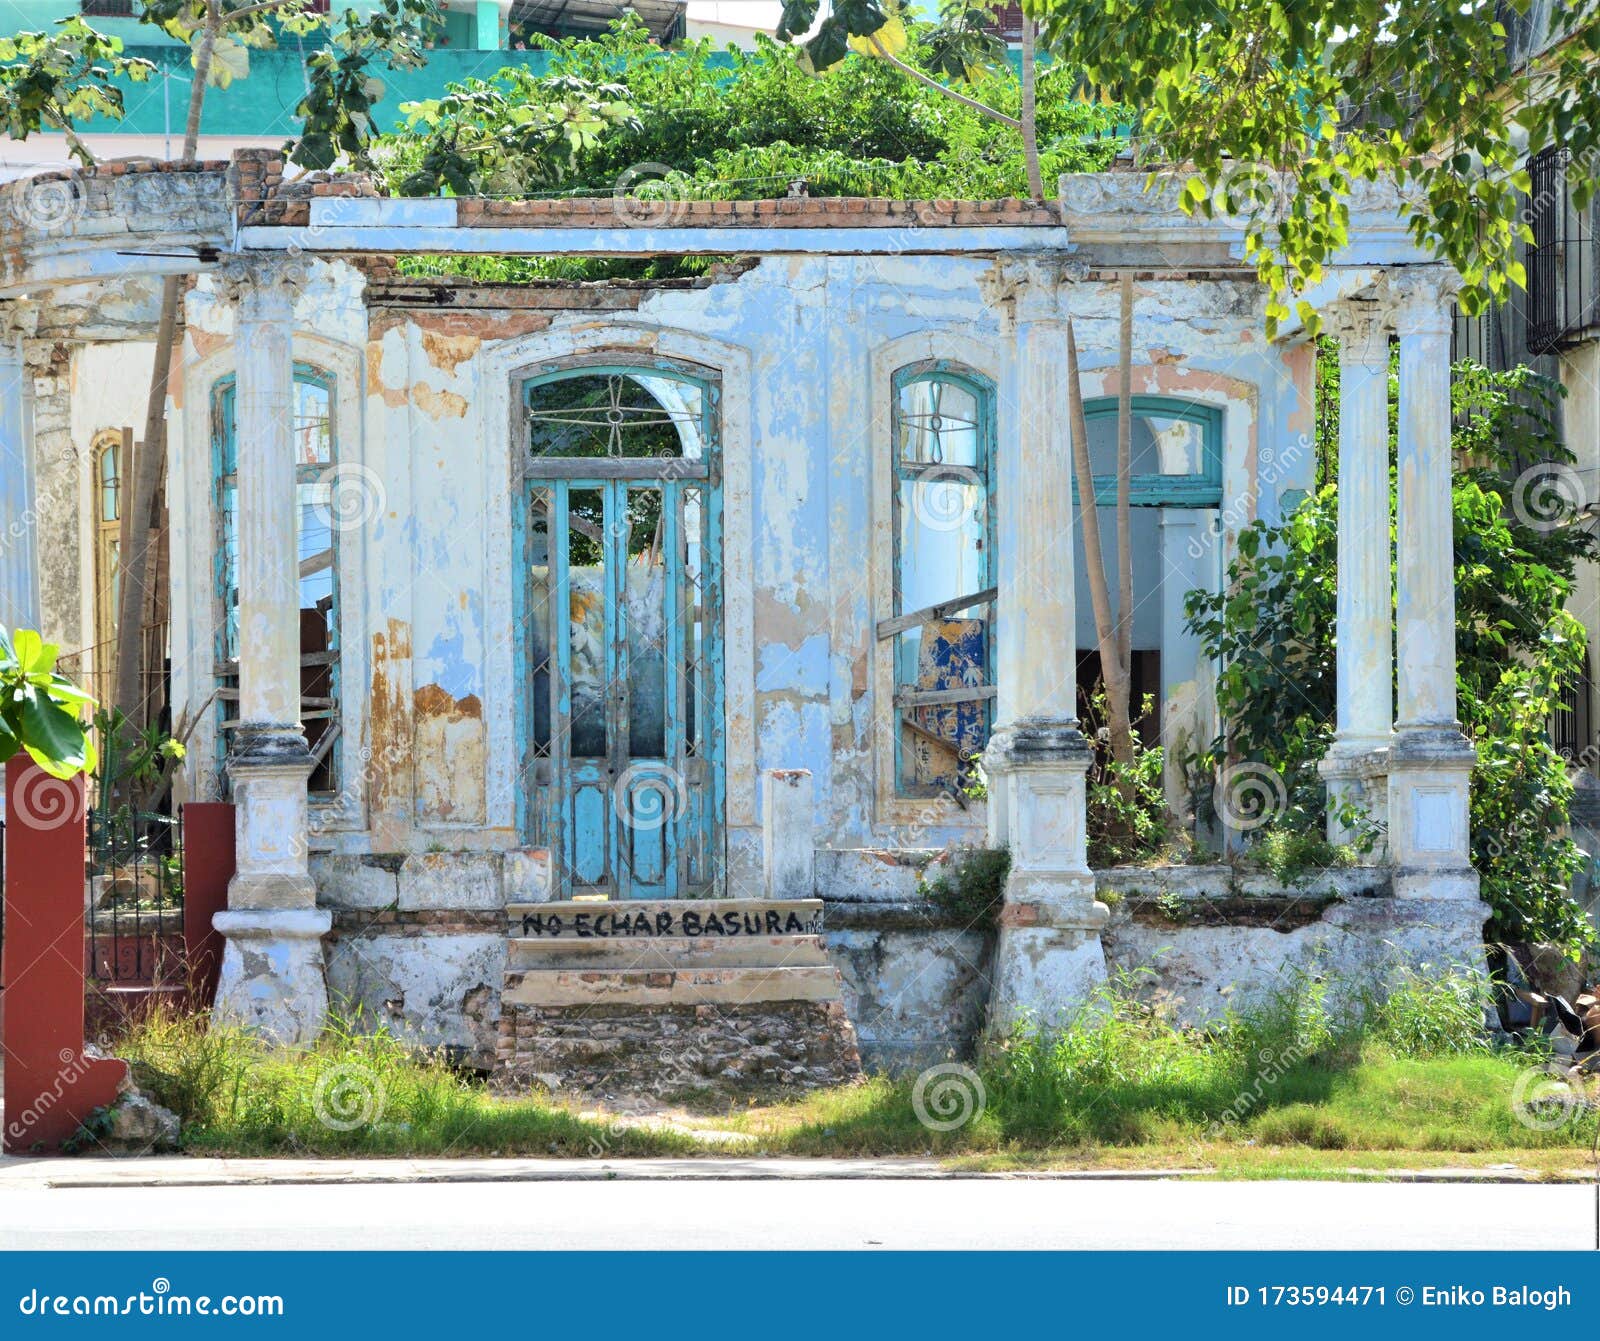 old abandoned roofless house with blue door and windows in havana, cuba